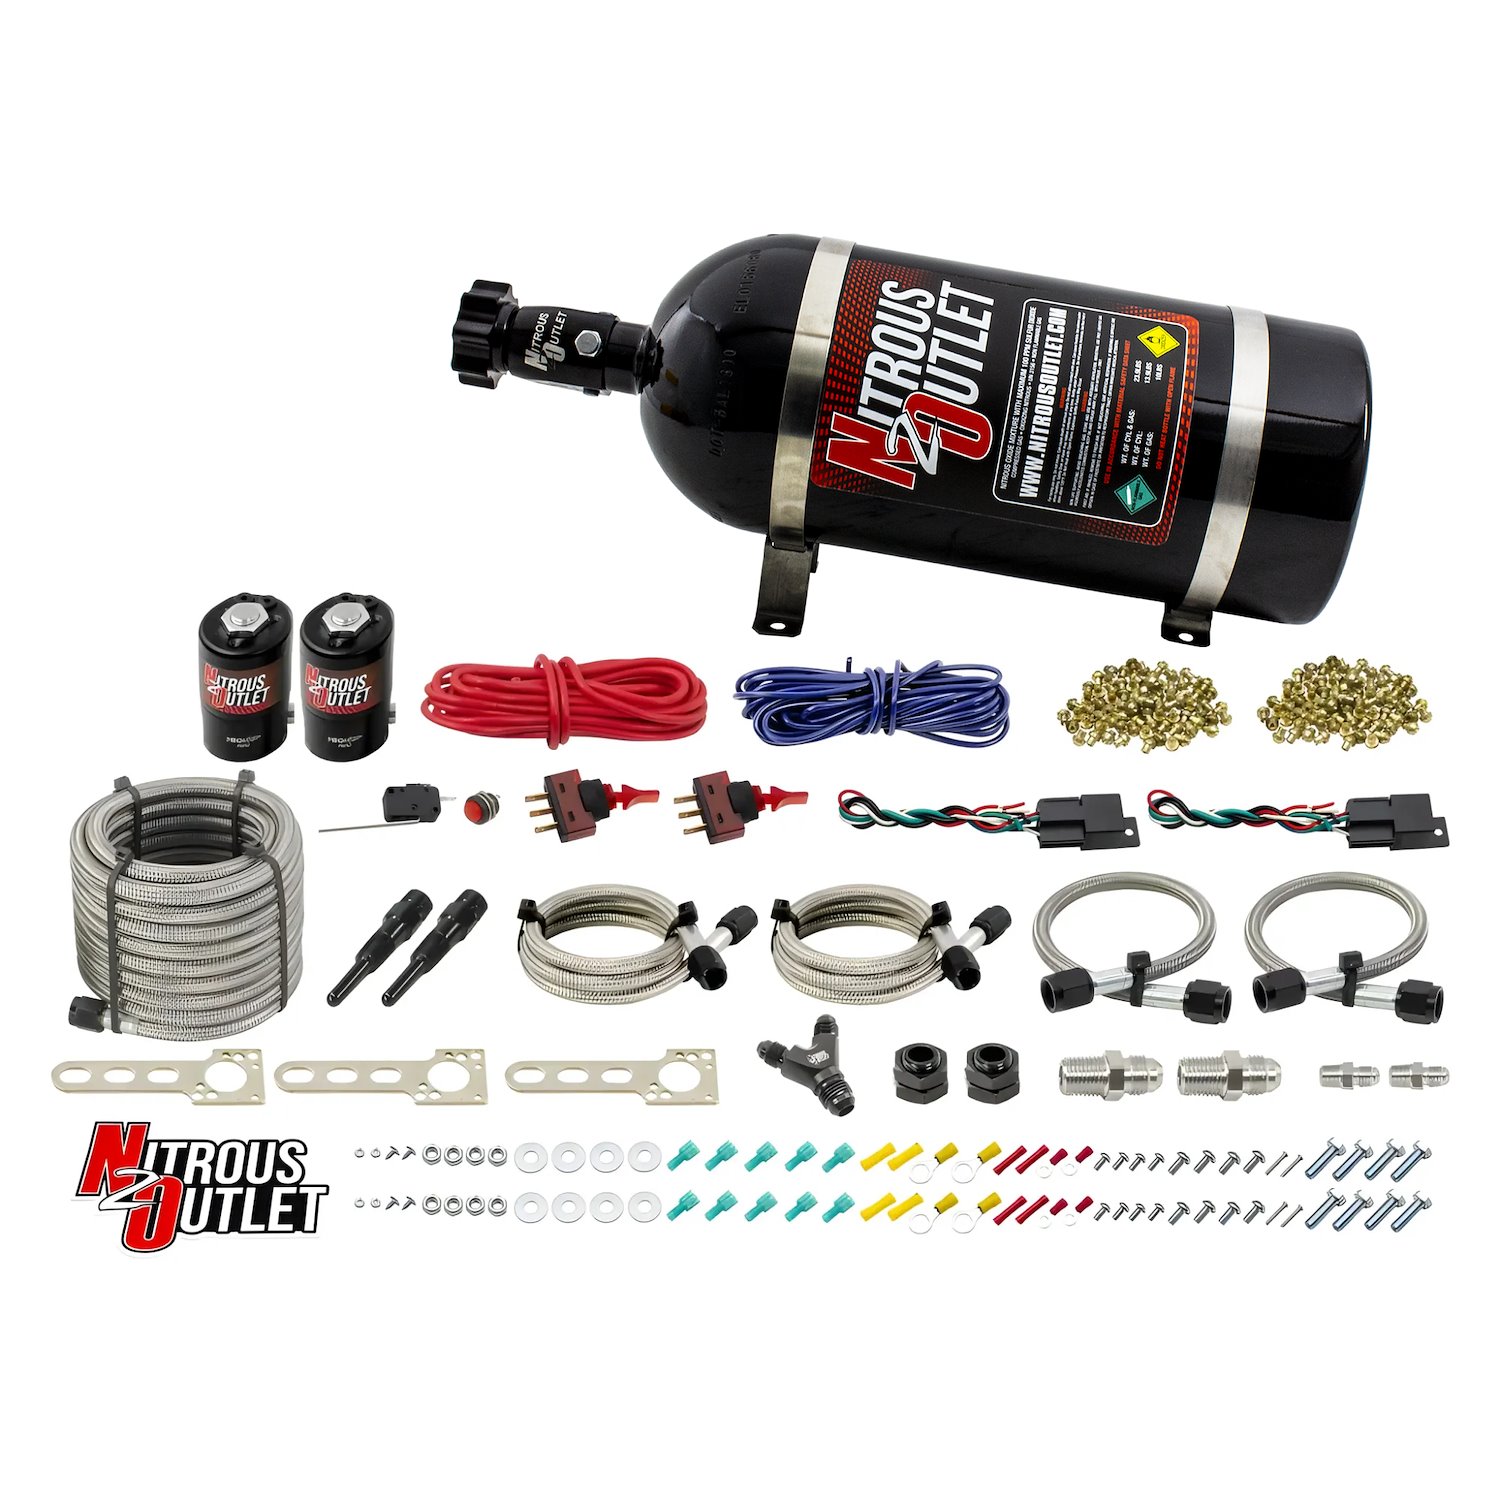 00-10207-10 Universal EFI Dual-Stage Dry Single-Nozzle System, 35-200HP, 10lb Bottle